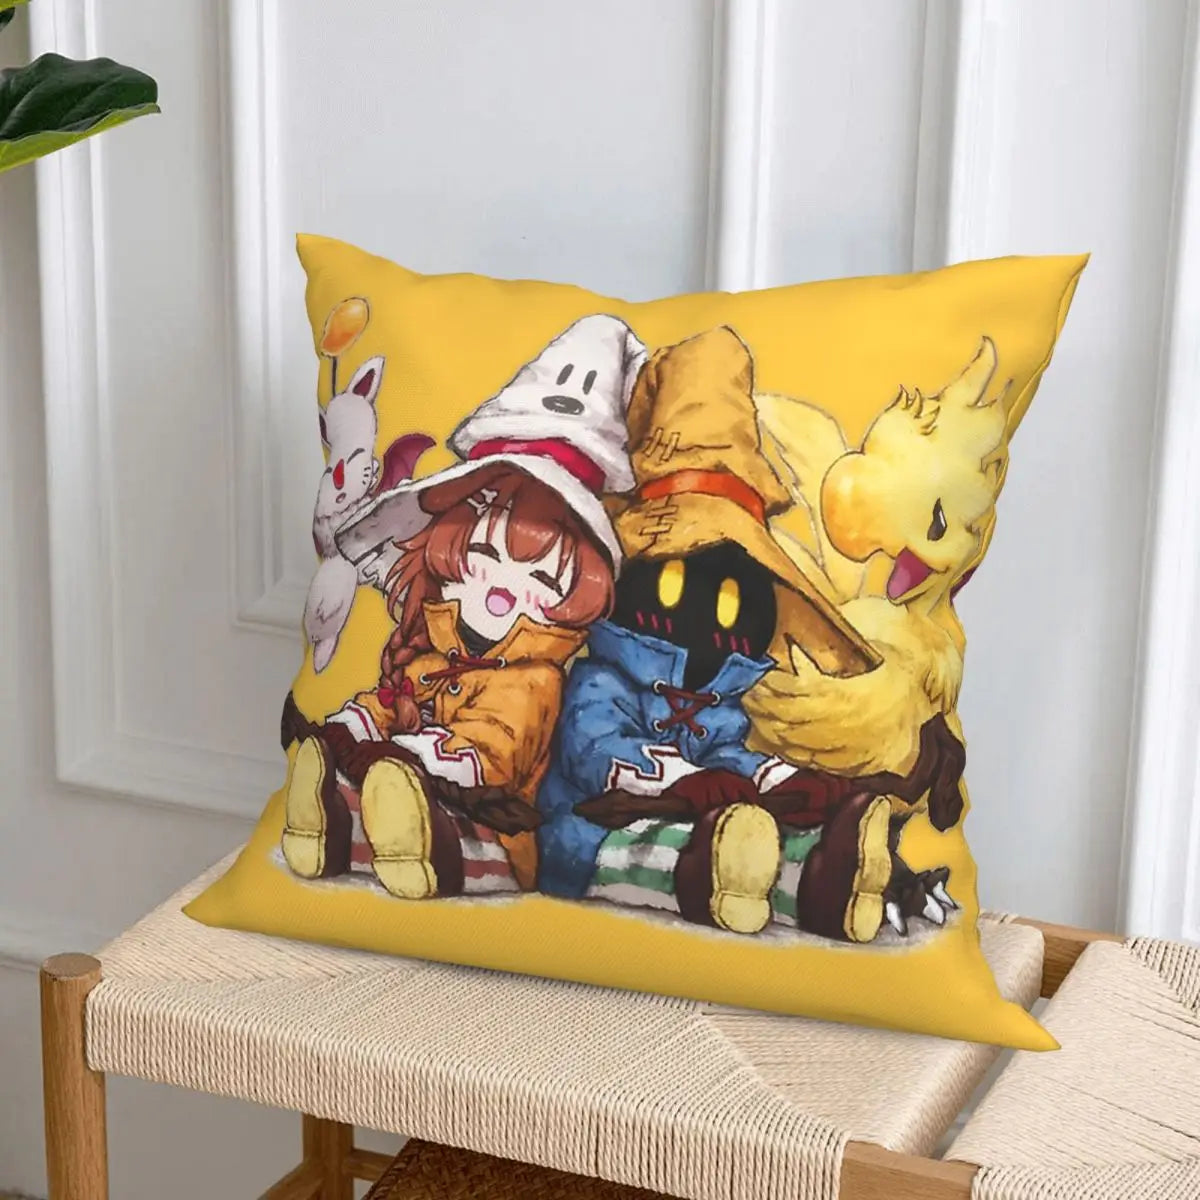 Cute Chocobo & Tifa Final fantasy gaming Soft Cushion Cover Decor Throw Pillow Case Cover for Seater Double-sided Printed